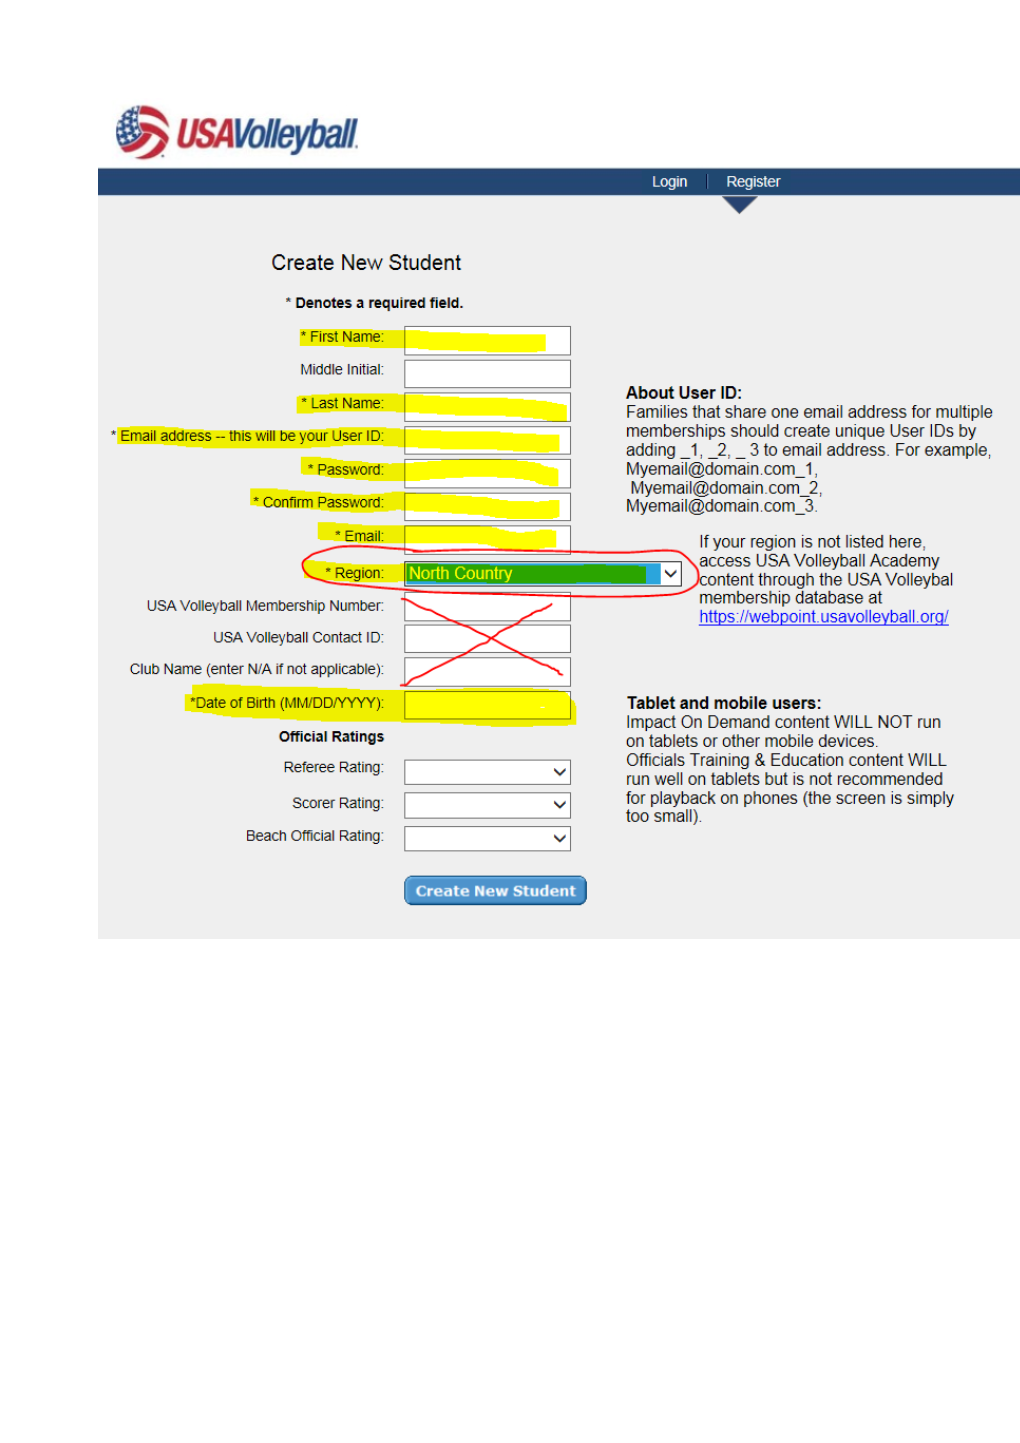 Select the CREATE NEW STUDENT Option When First Accessing the Website